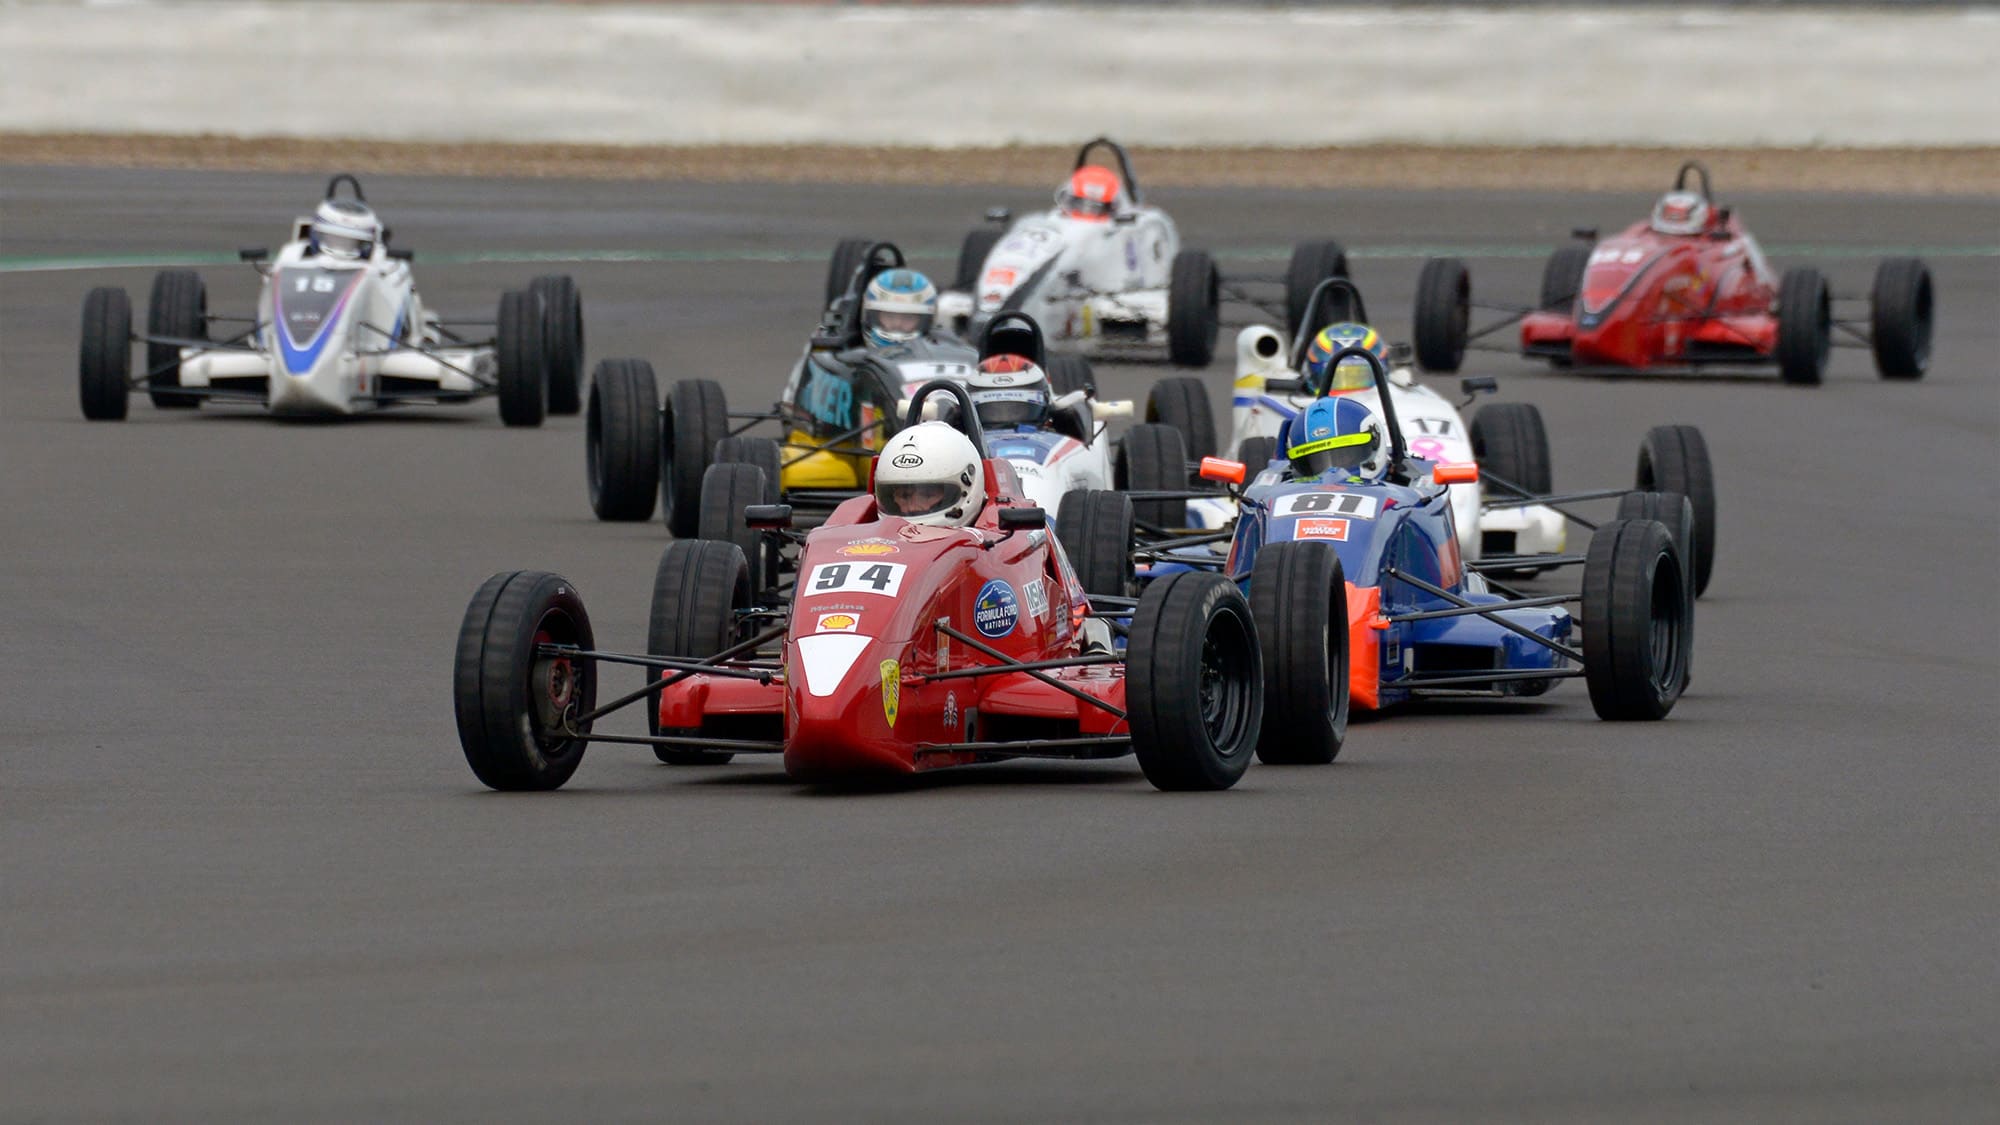 2020 Walter Hayes Trophy at Silverstone